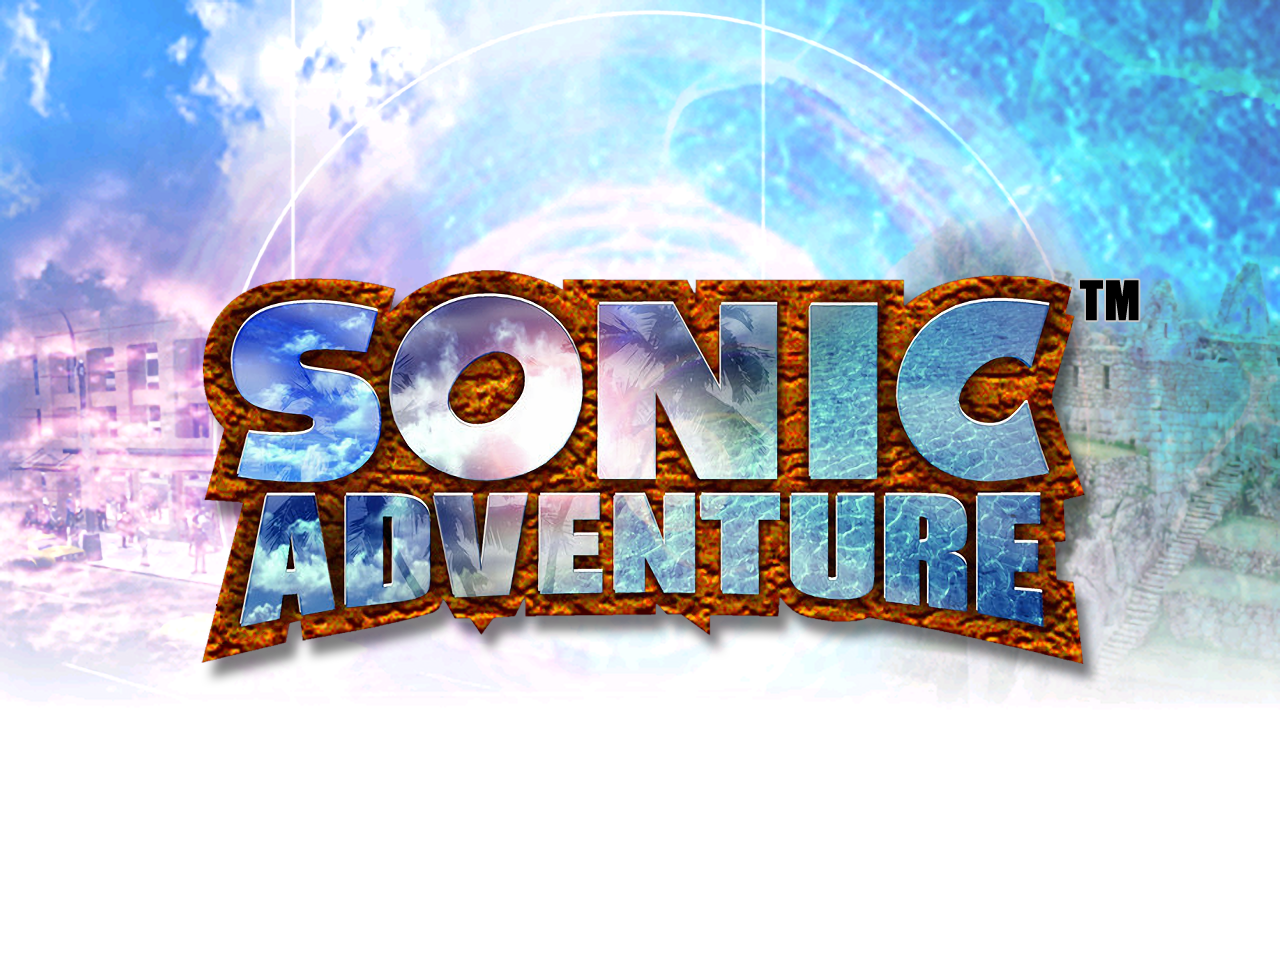 sonic adventure dx pc 2003 to 2004 patch